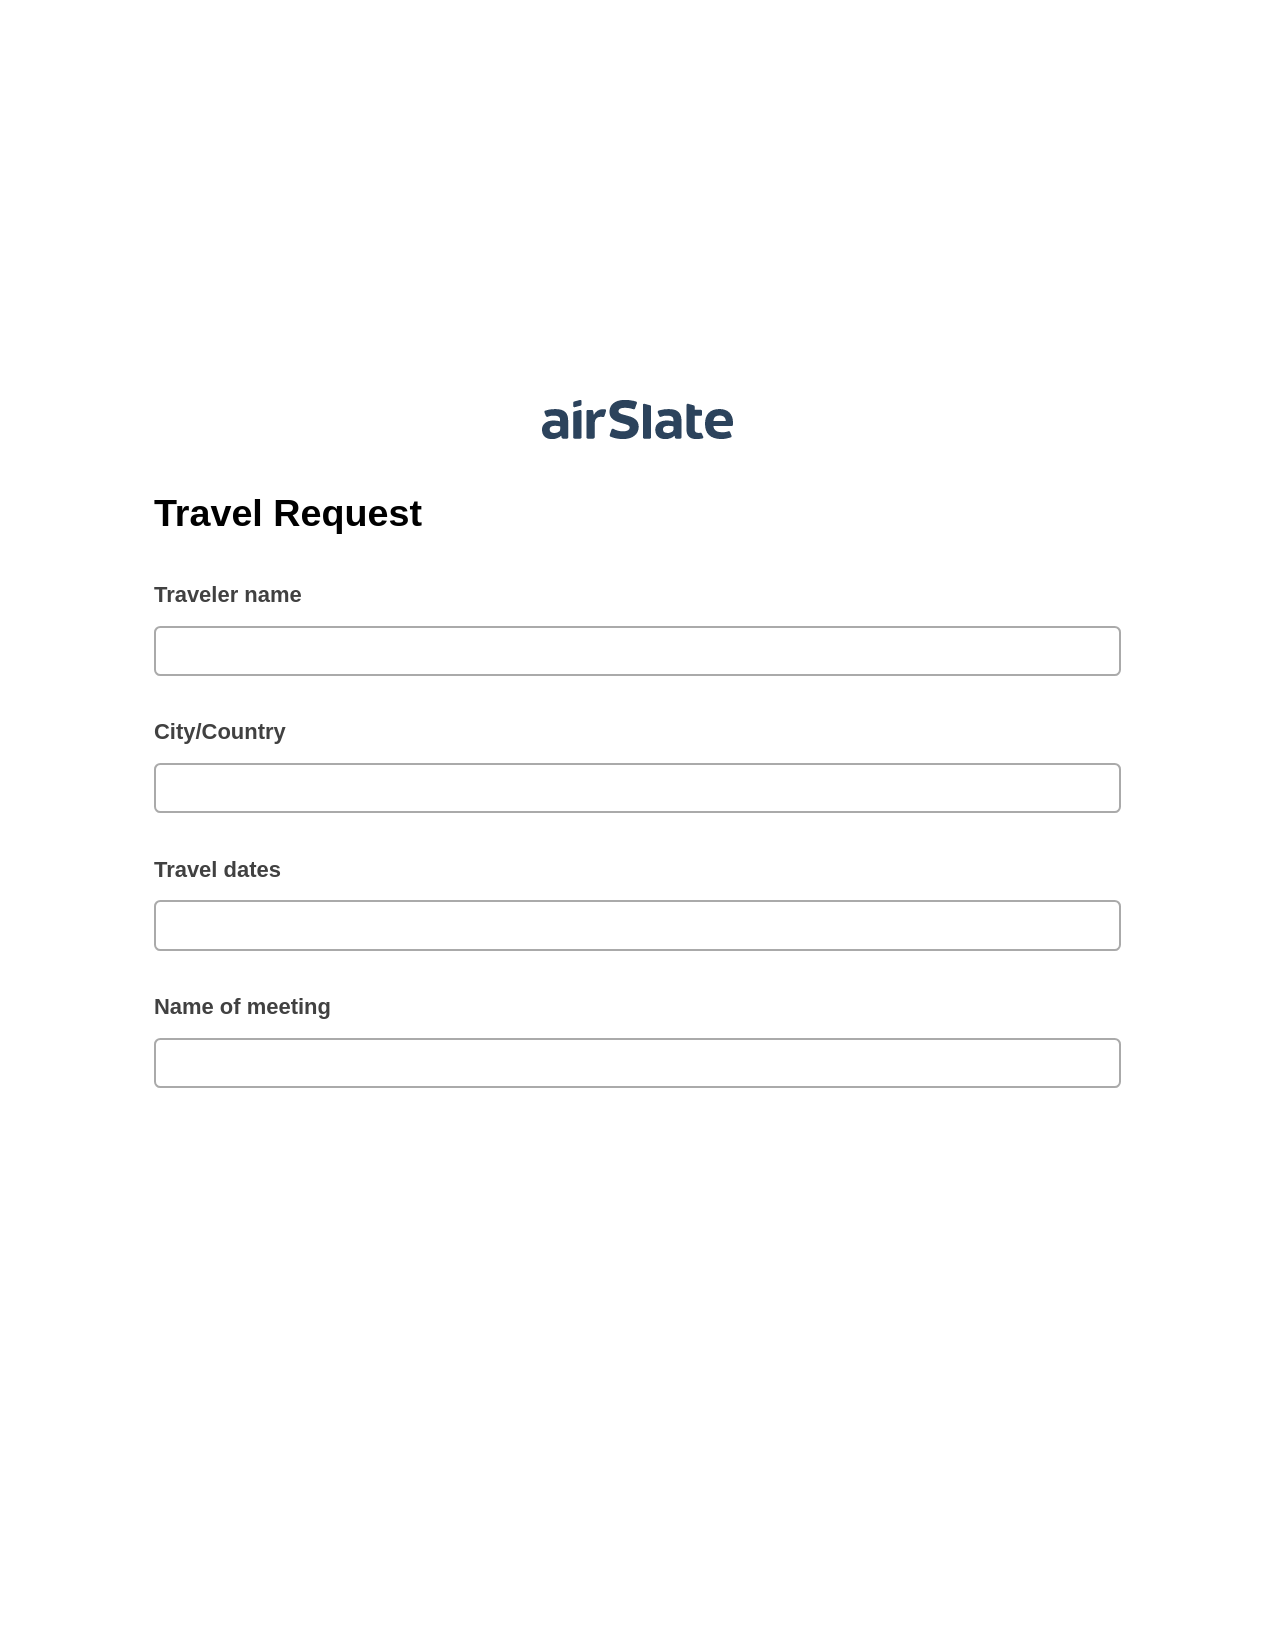 Multirole Travel Request Pre-fill Dropdown from Airtable, Create slate addon, Dropbox Bot